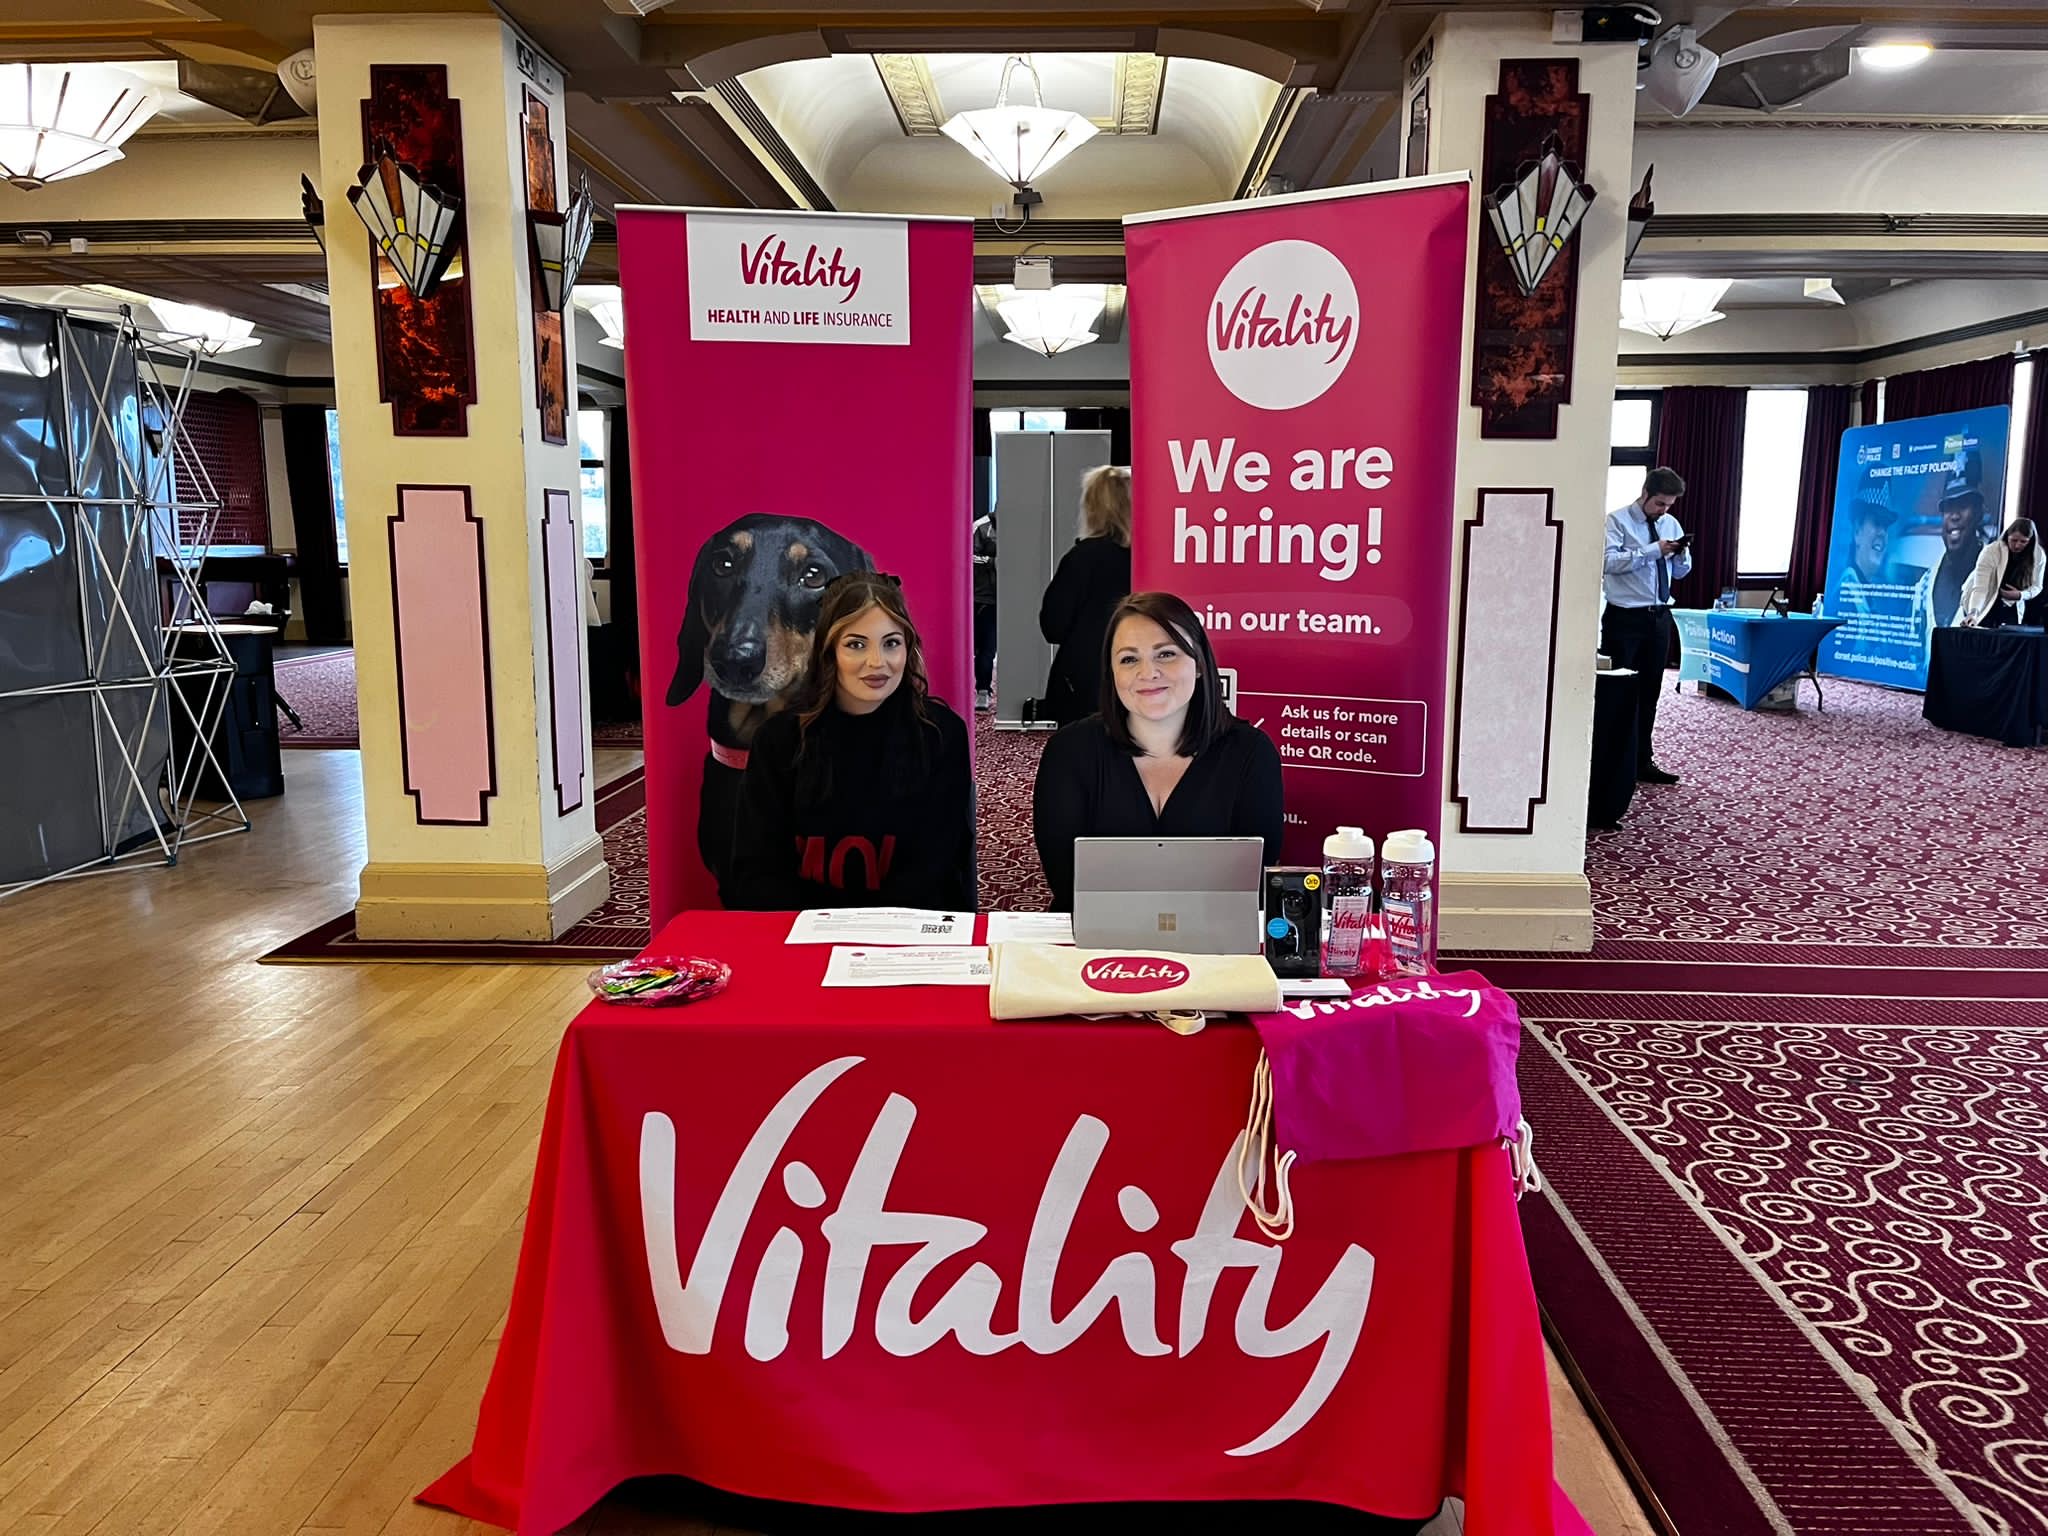 Vitality Insurance at our event in Bournemouth